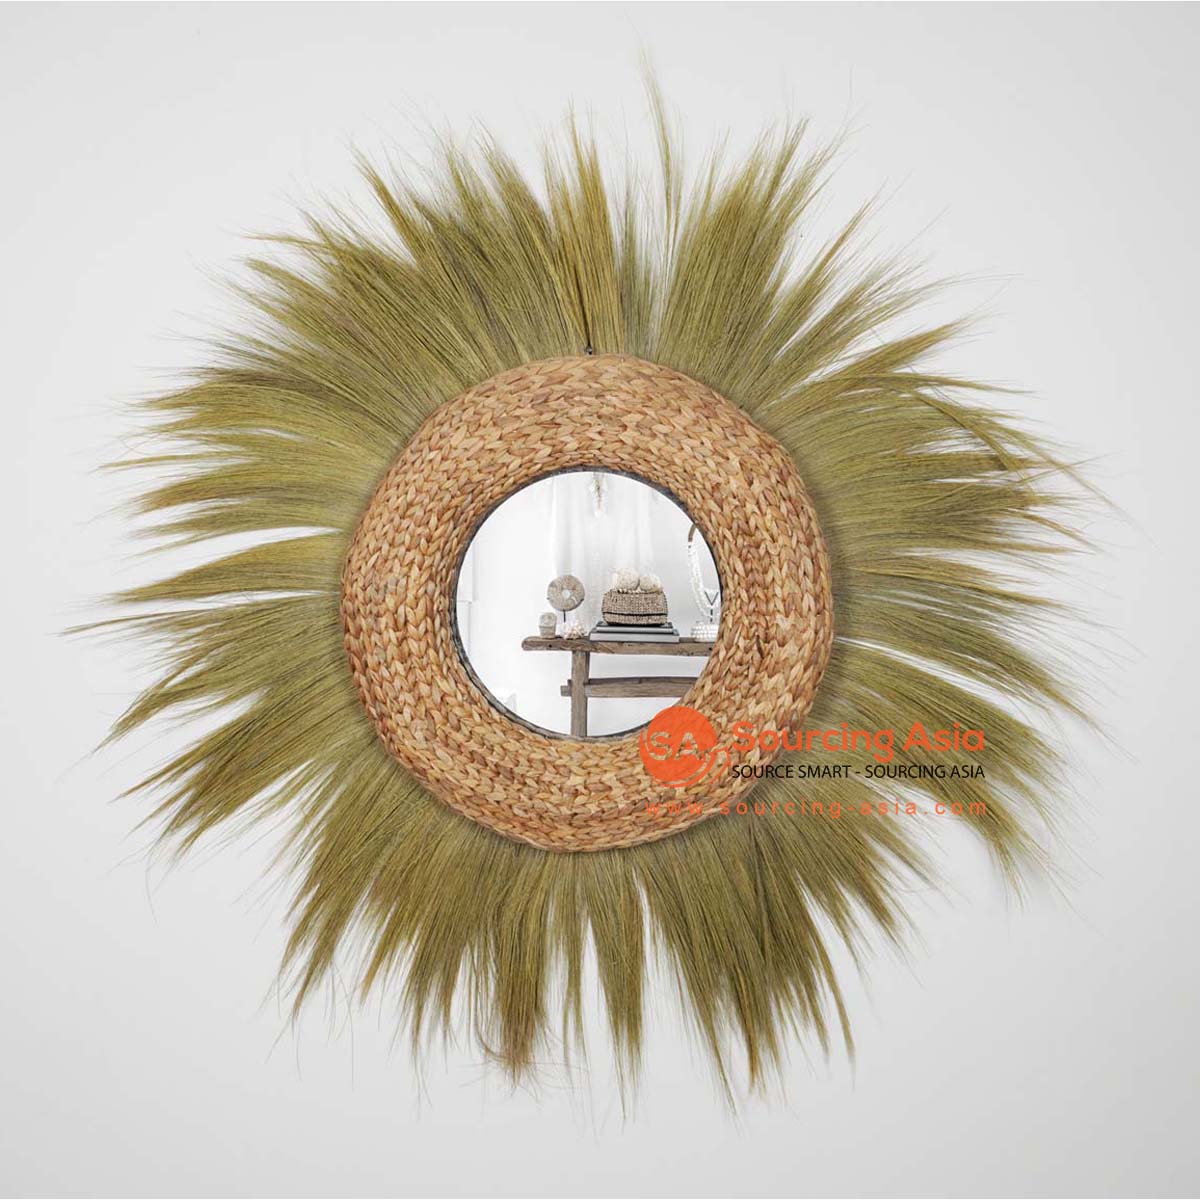 HBSC551 NATURAL WATER HYACINTH AND RAYUNG DECORATIVE ROUND MIRROR DECORATION